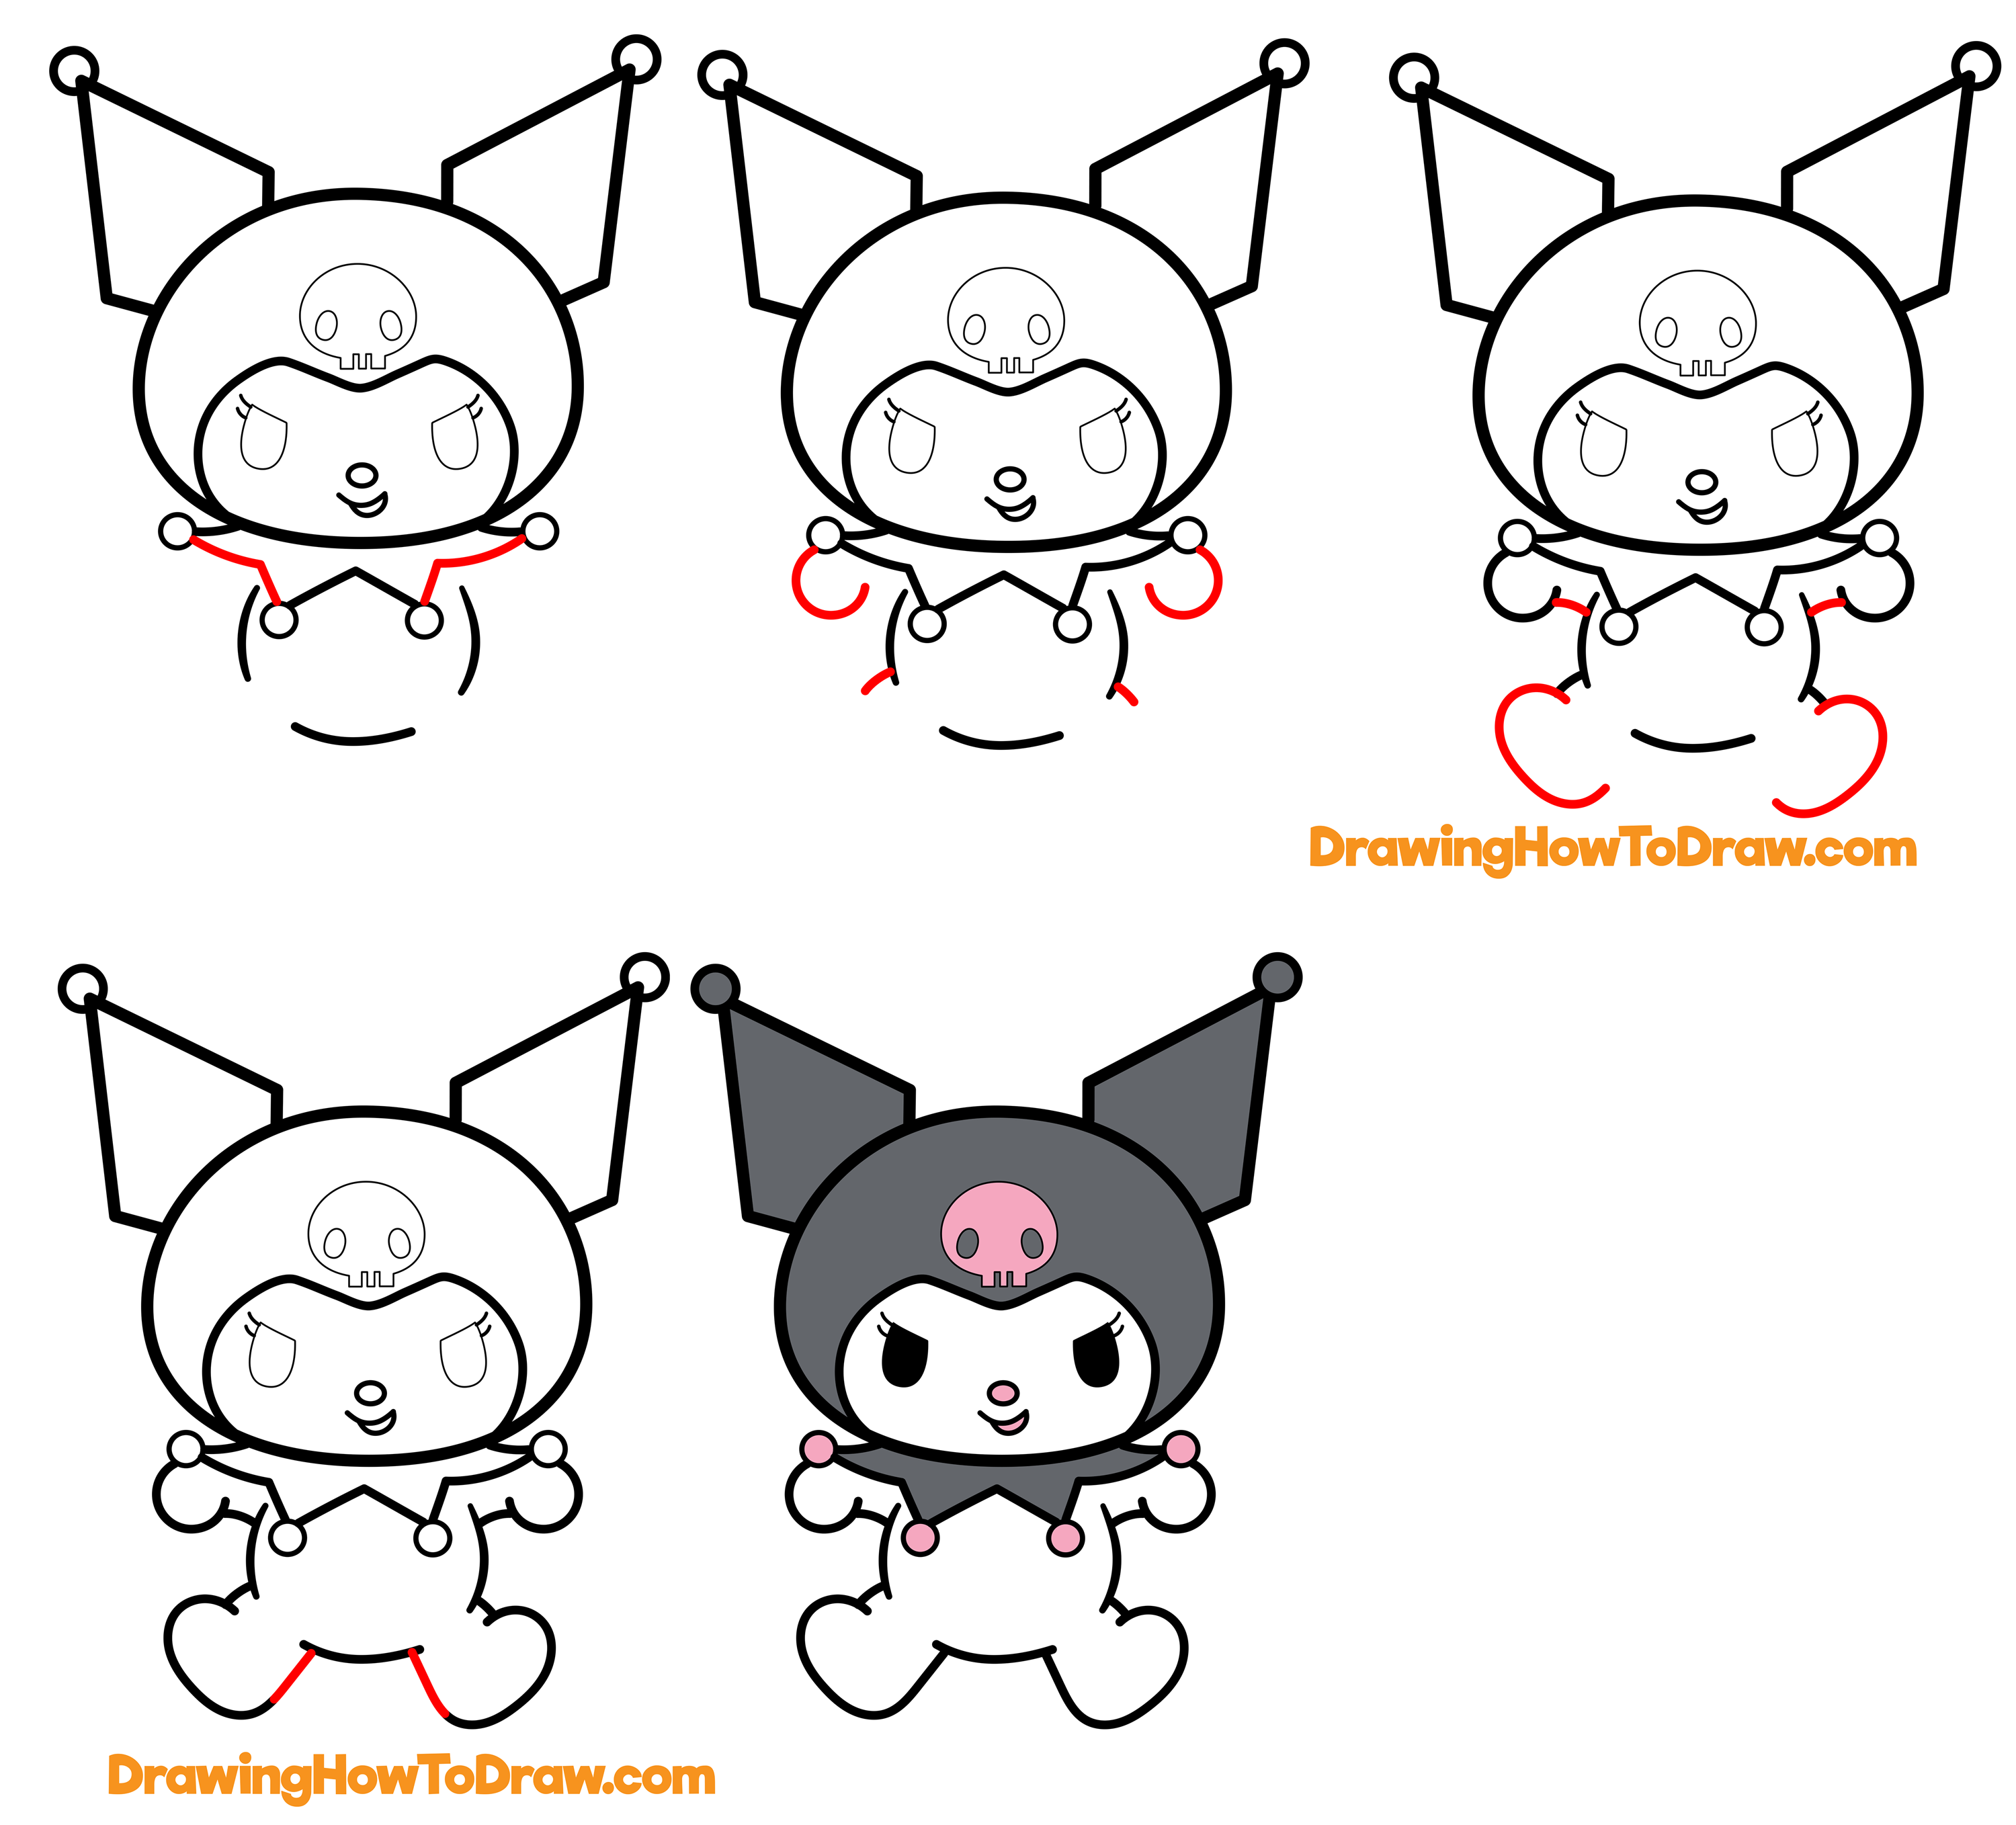 How to Draw Kuromi from My Melody and Hello Kitty Easy Step by Step